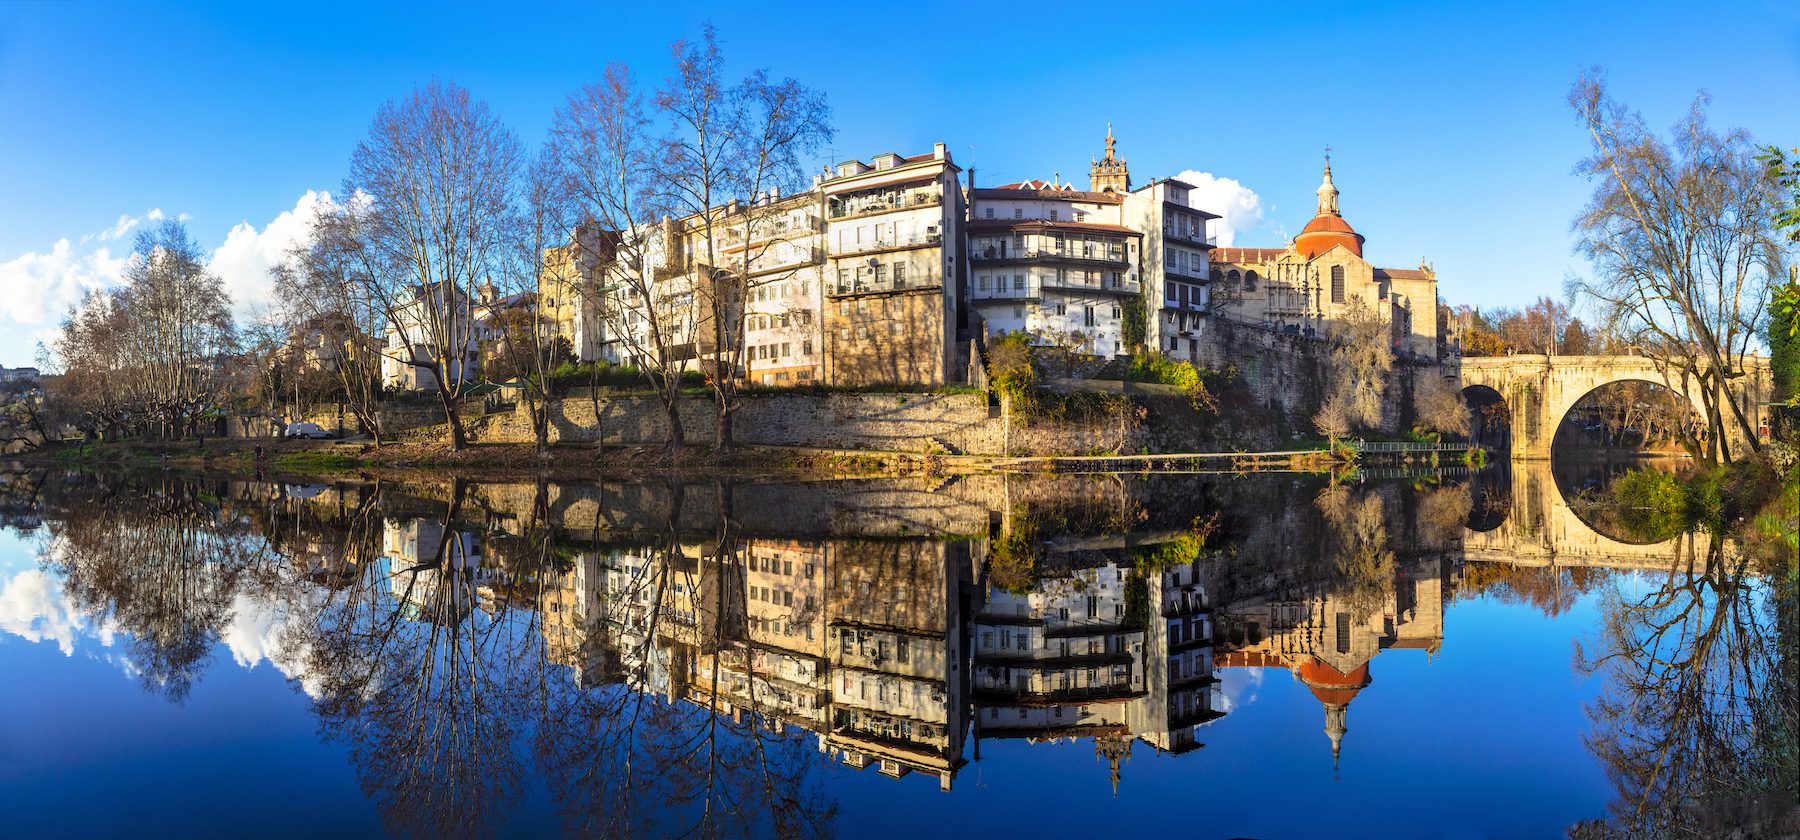 The Amarante is reflected on a complpetely still lake in Fall or Winter in Portugal